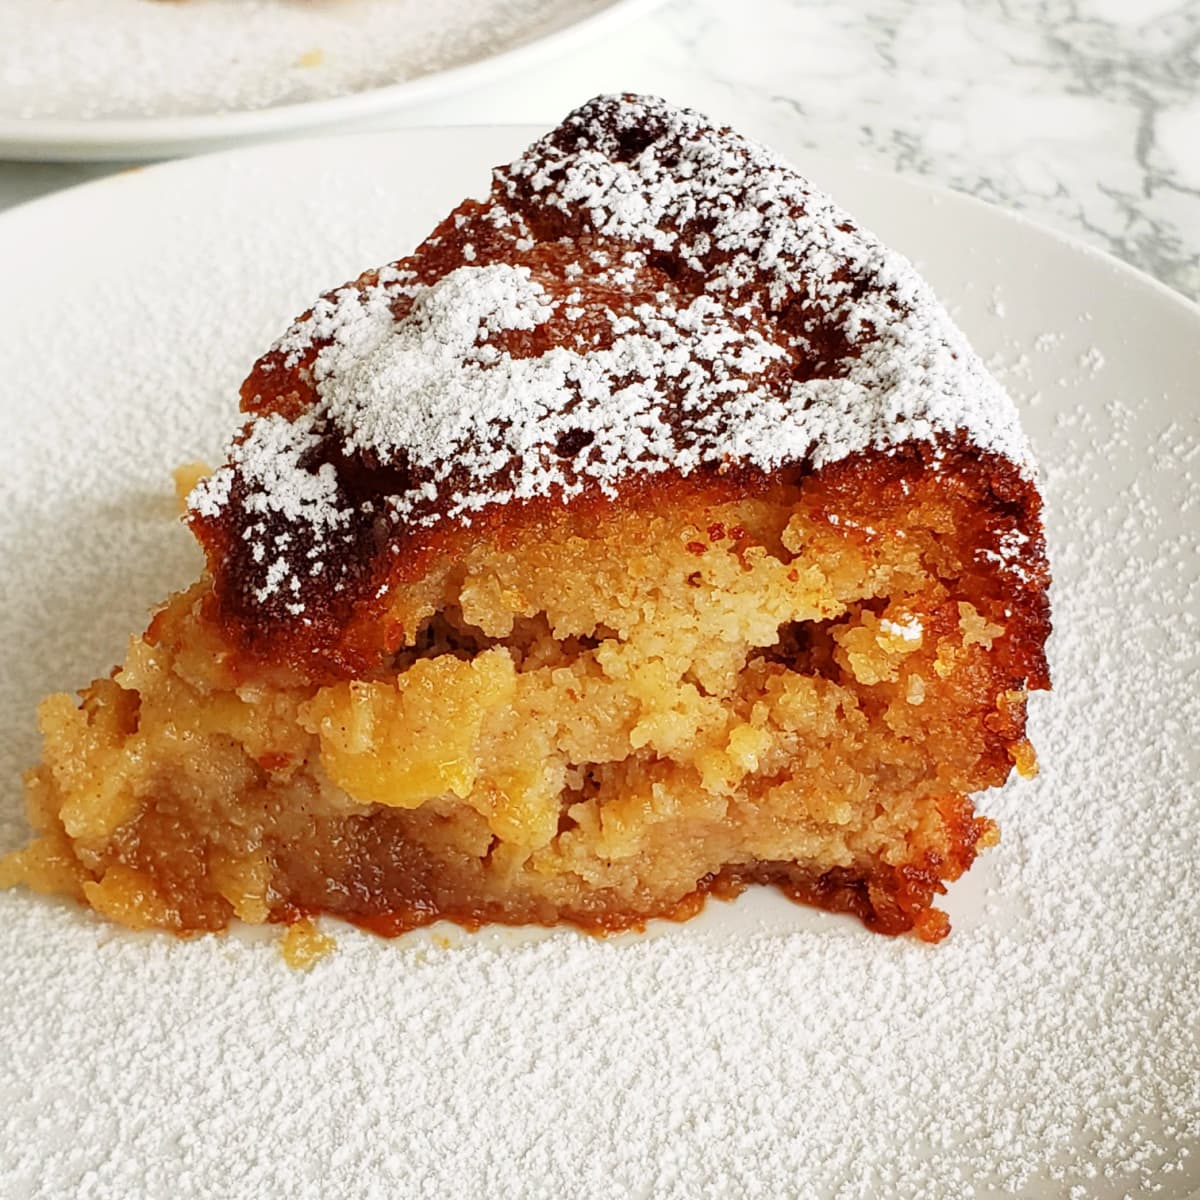 A wedge of Apple Almond Olive Oil Cake with powdered sugar sprinkled on top on a white plate